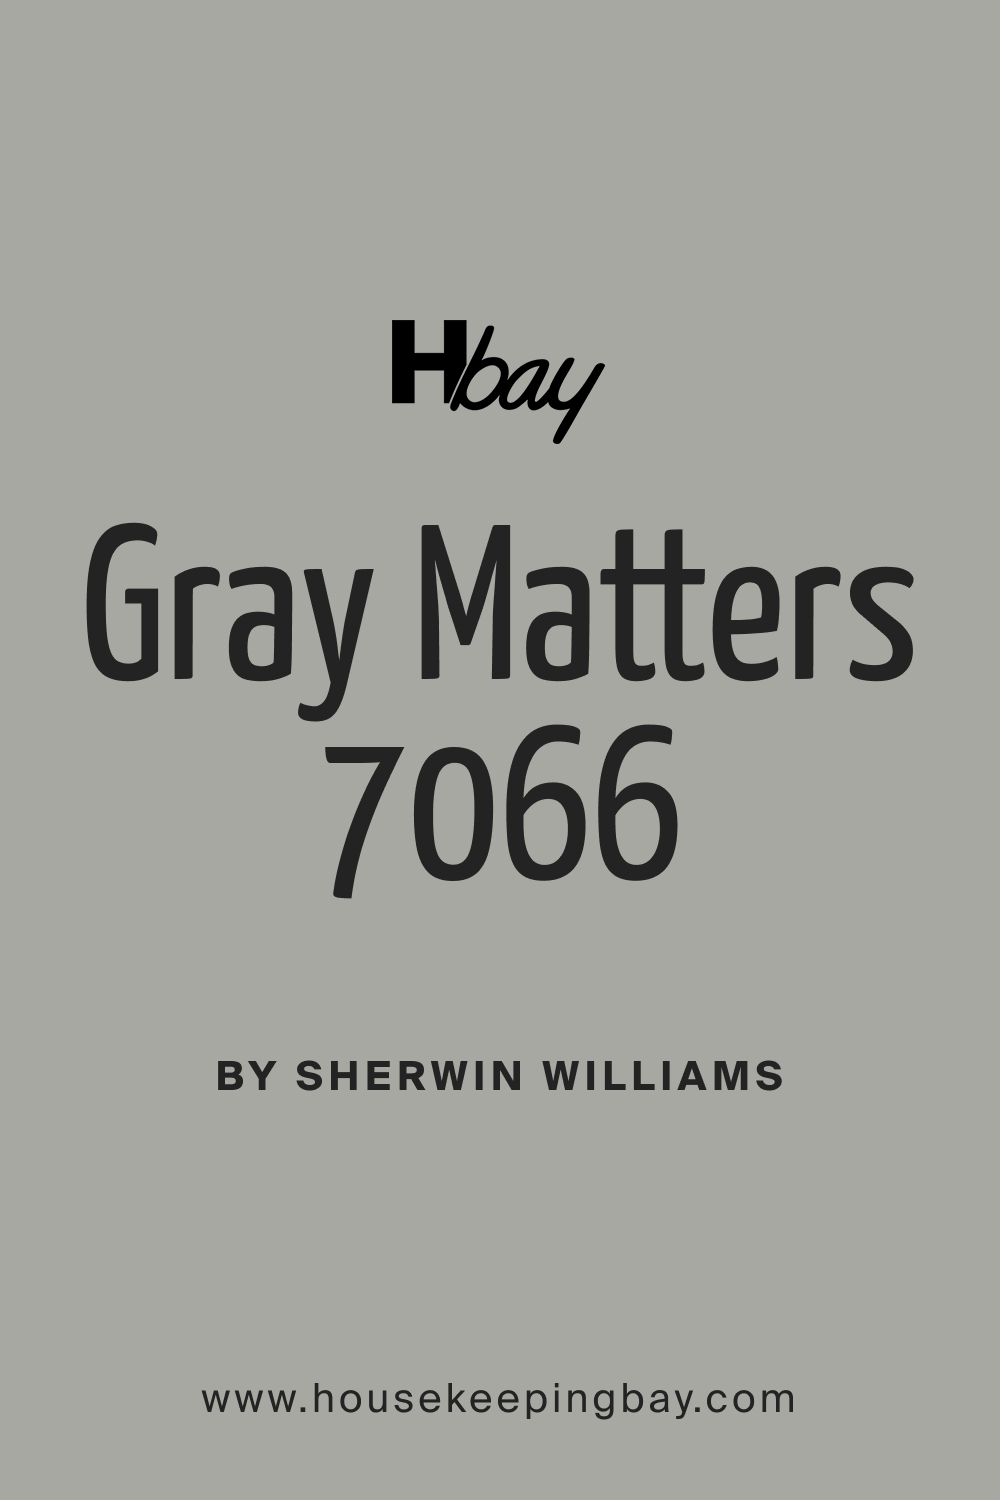 Gray Matters SW 7066 Paint Color by Sherwin Williams